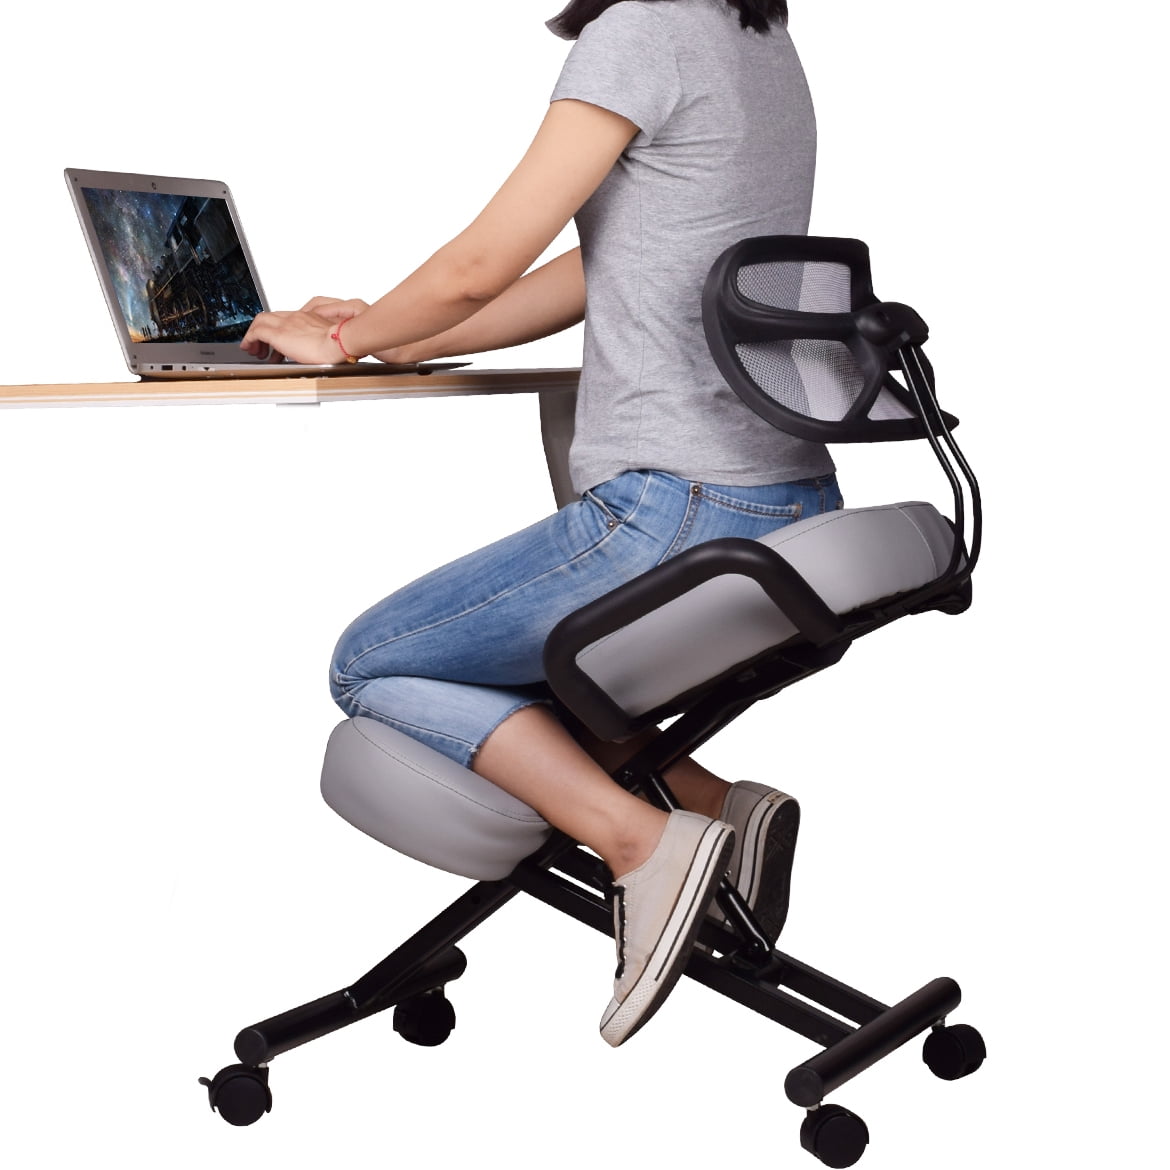 Kneeling chair with back